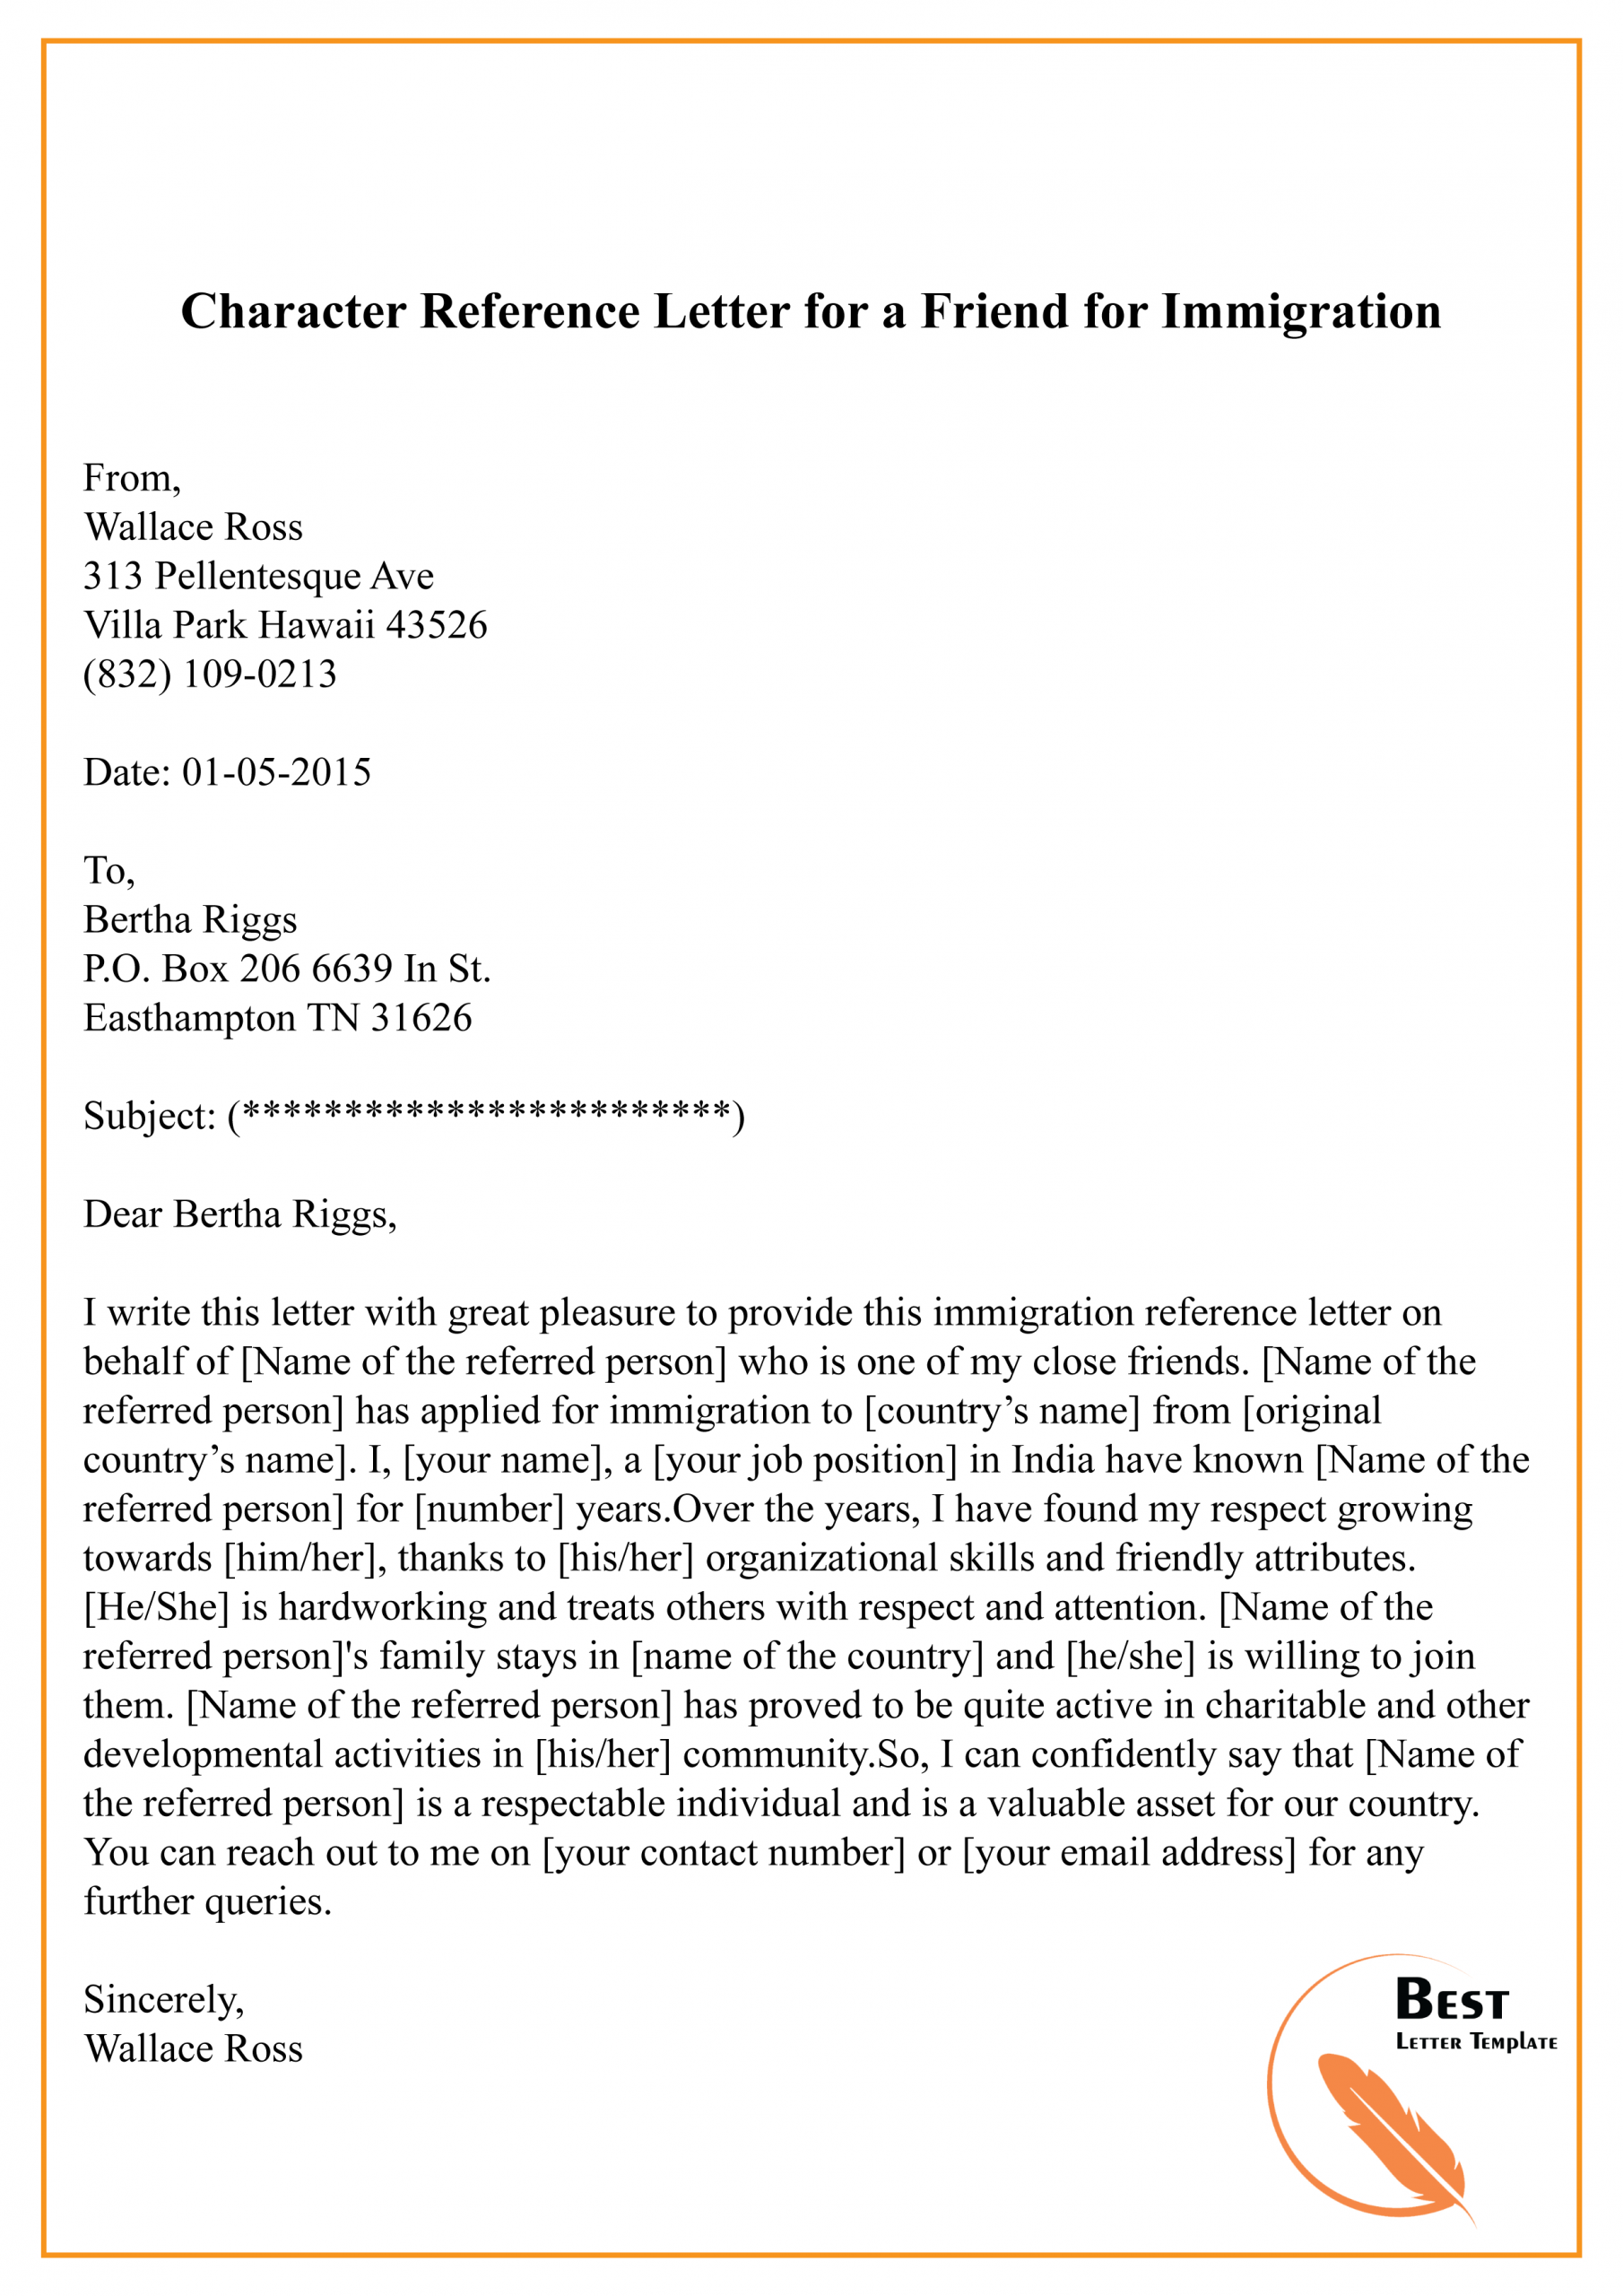 Sample Character Reference Letter For A Friend Template